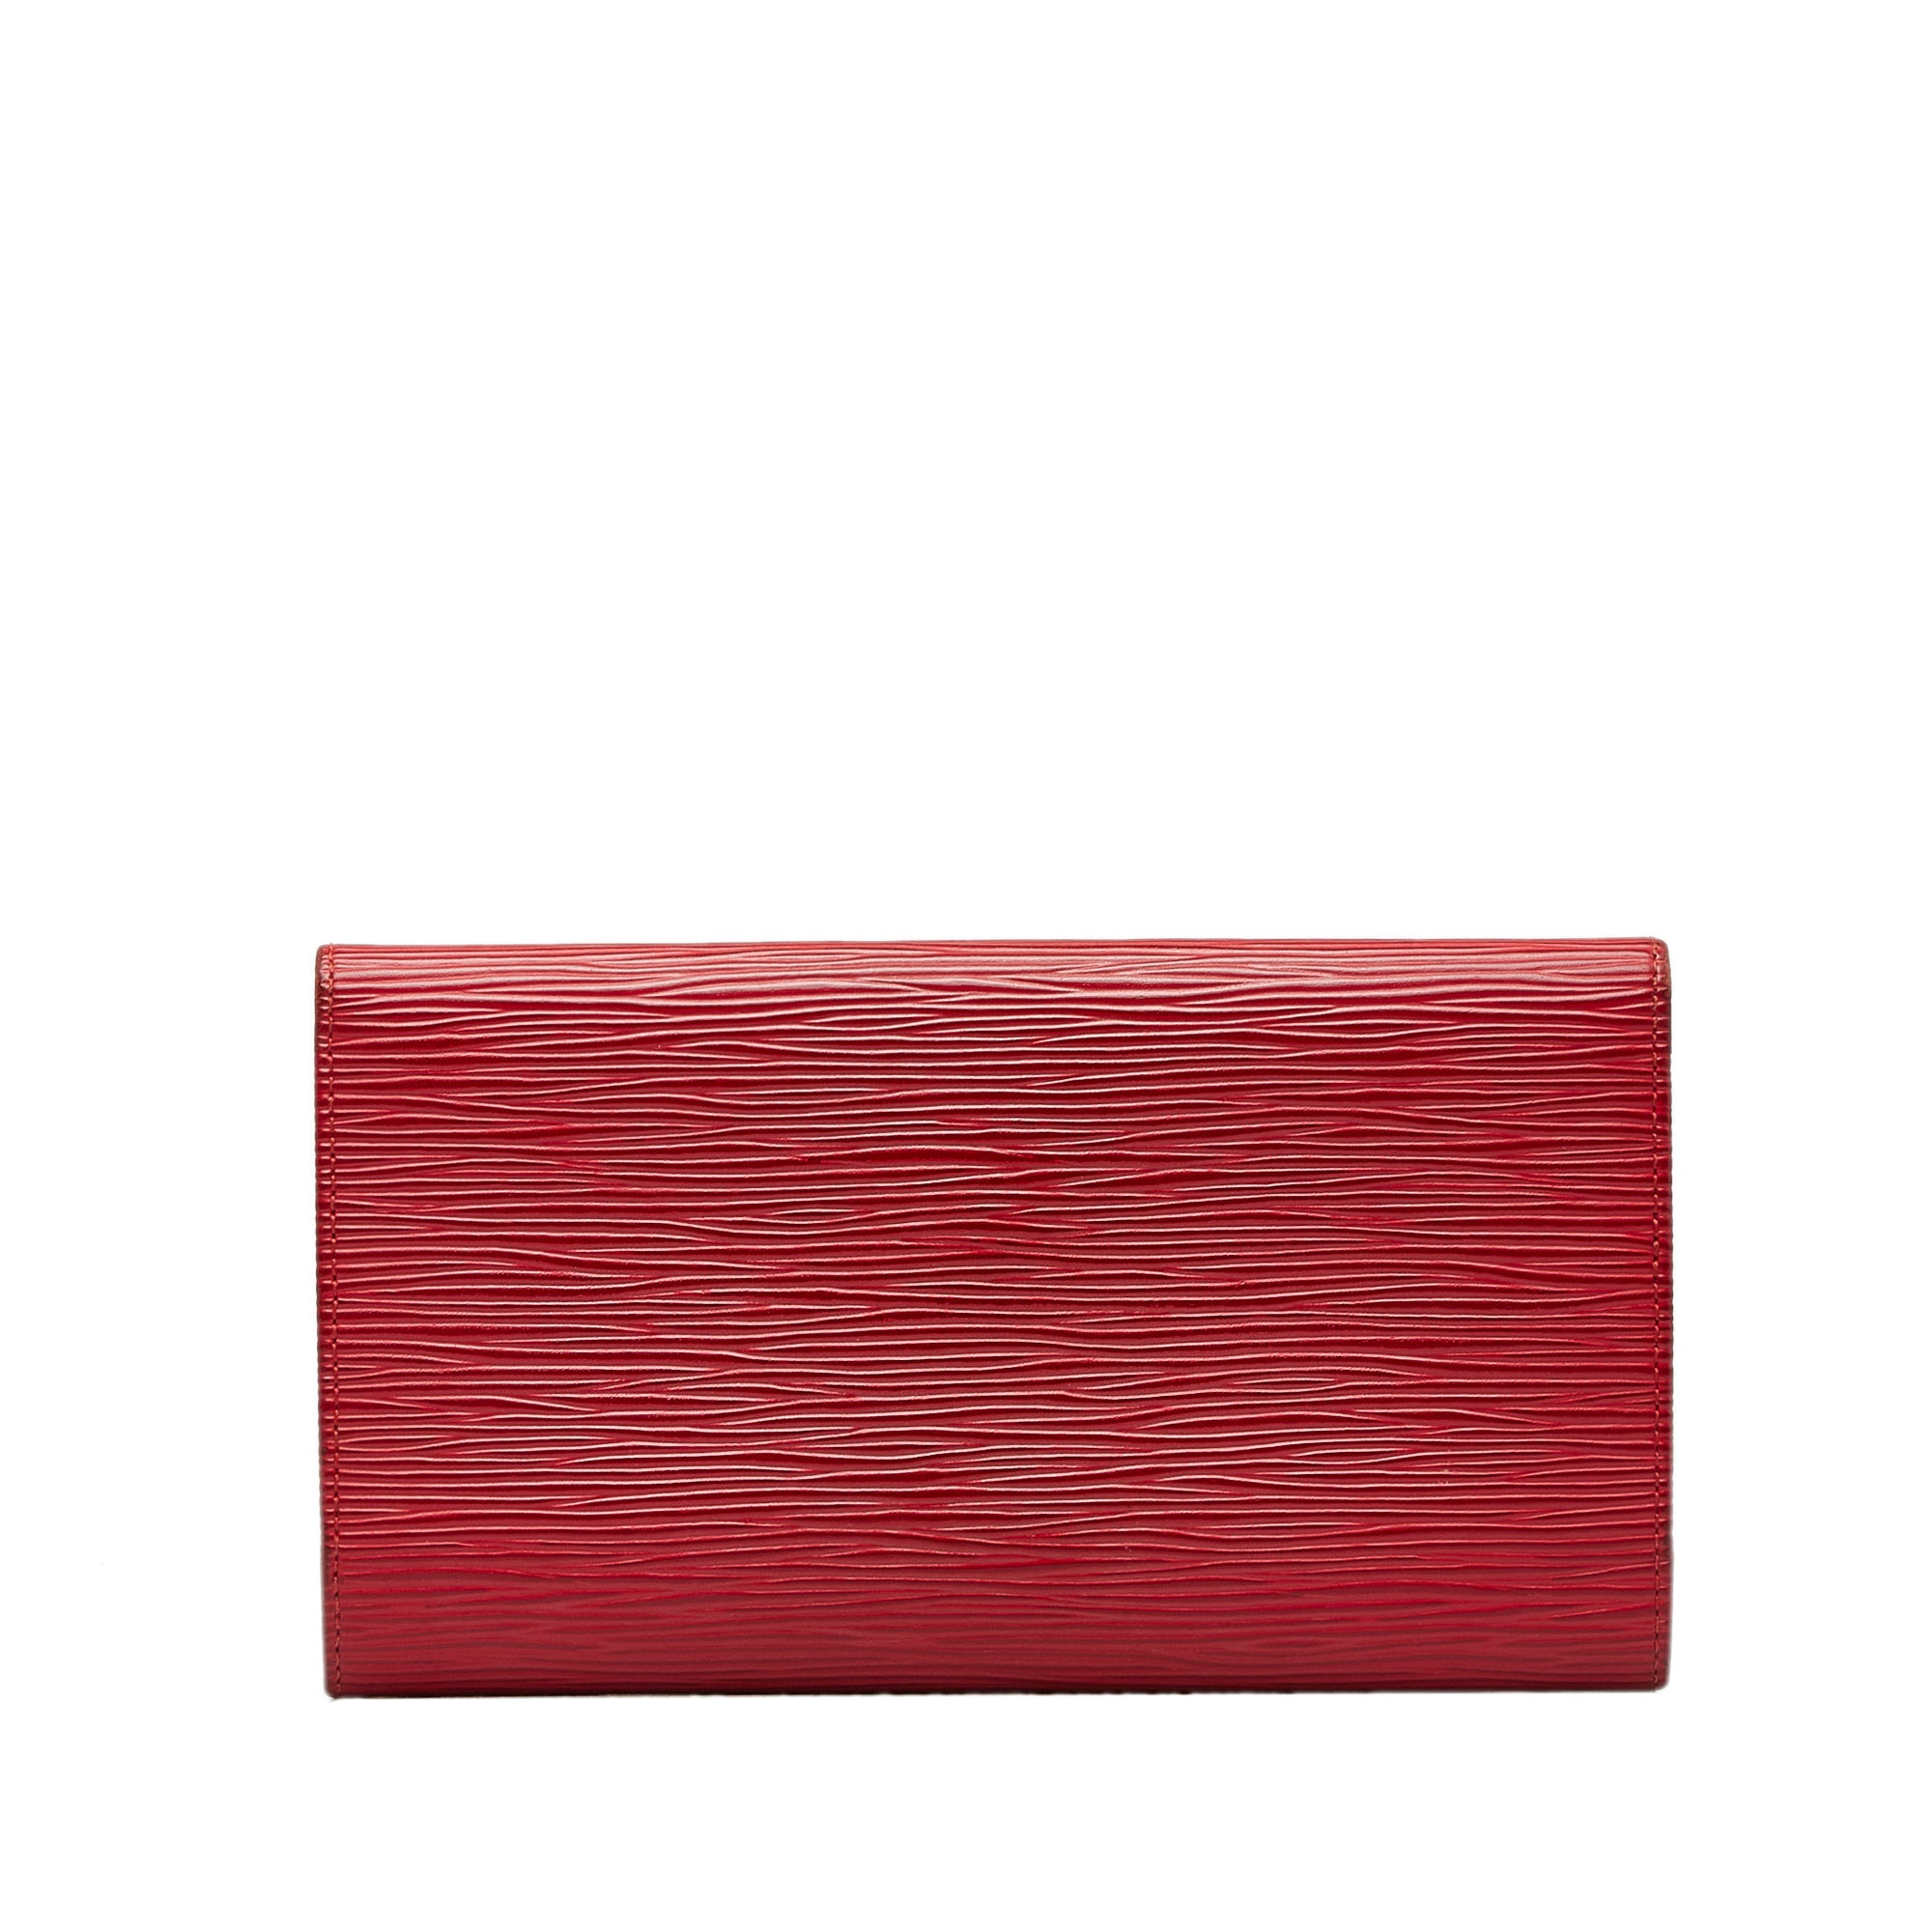 Authenticated Louis Vuitton red epi wallet